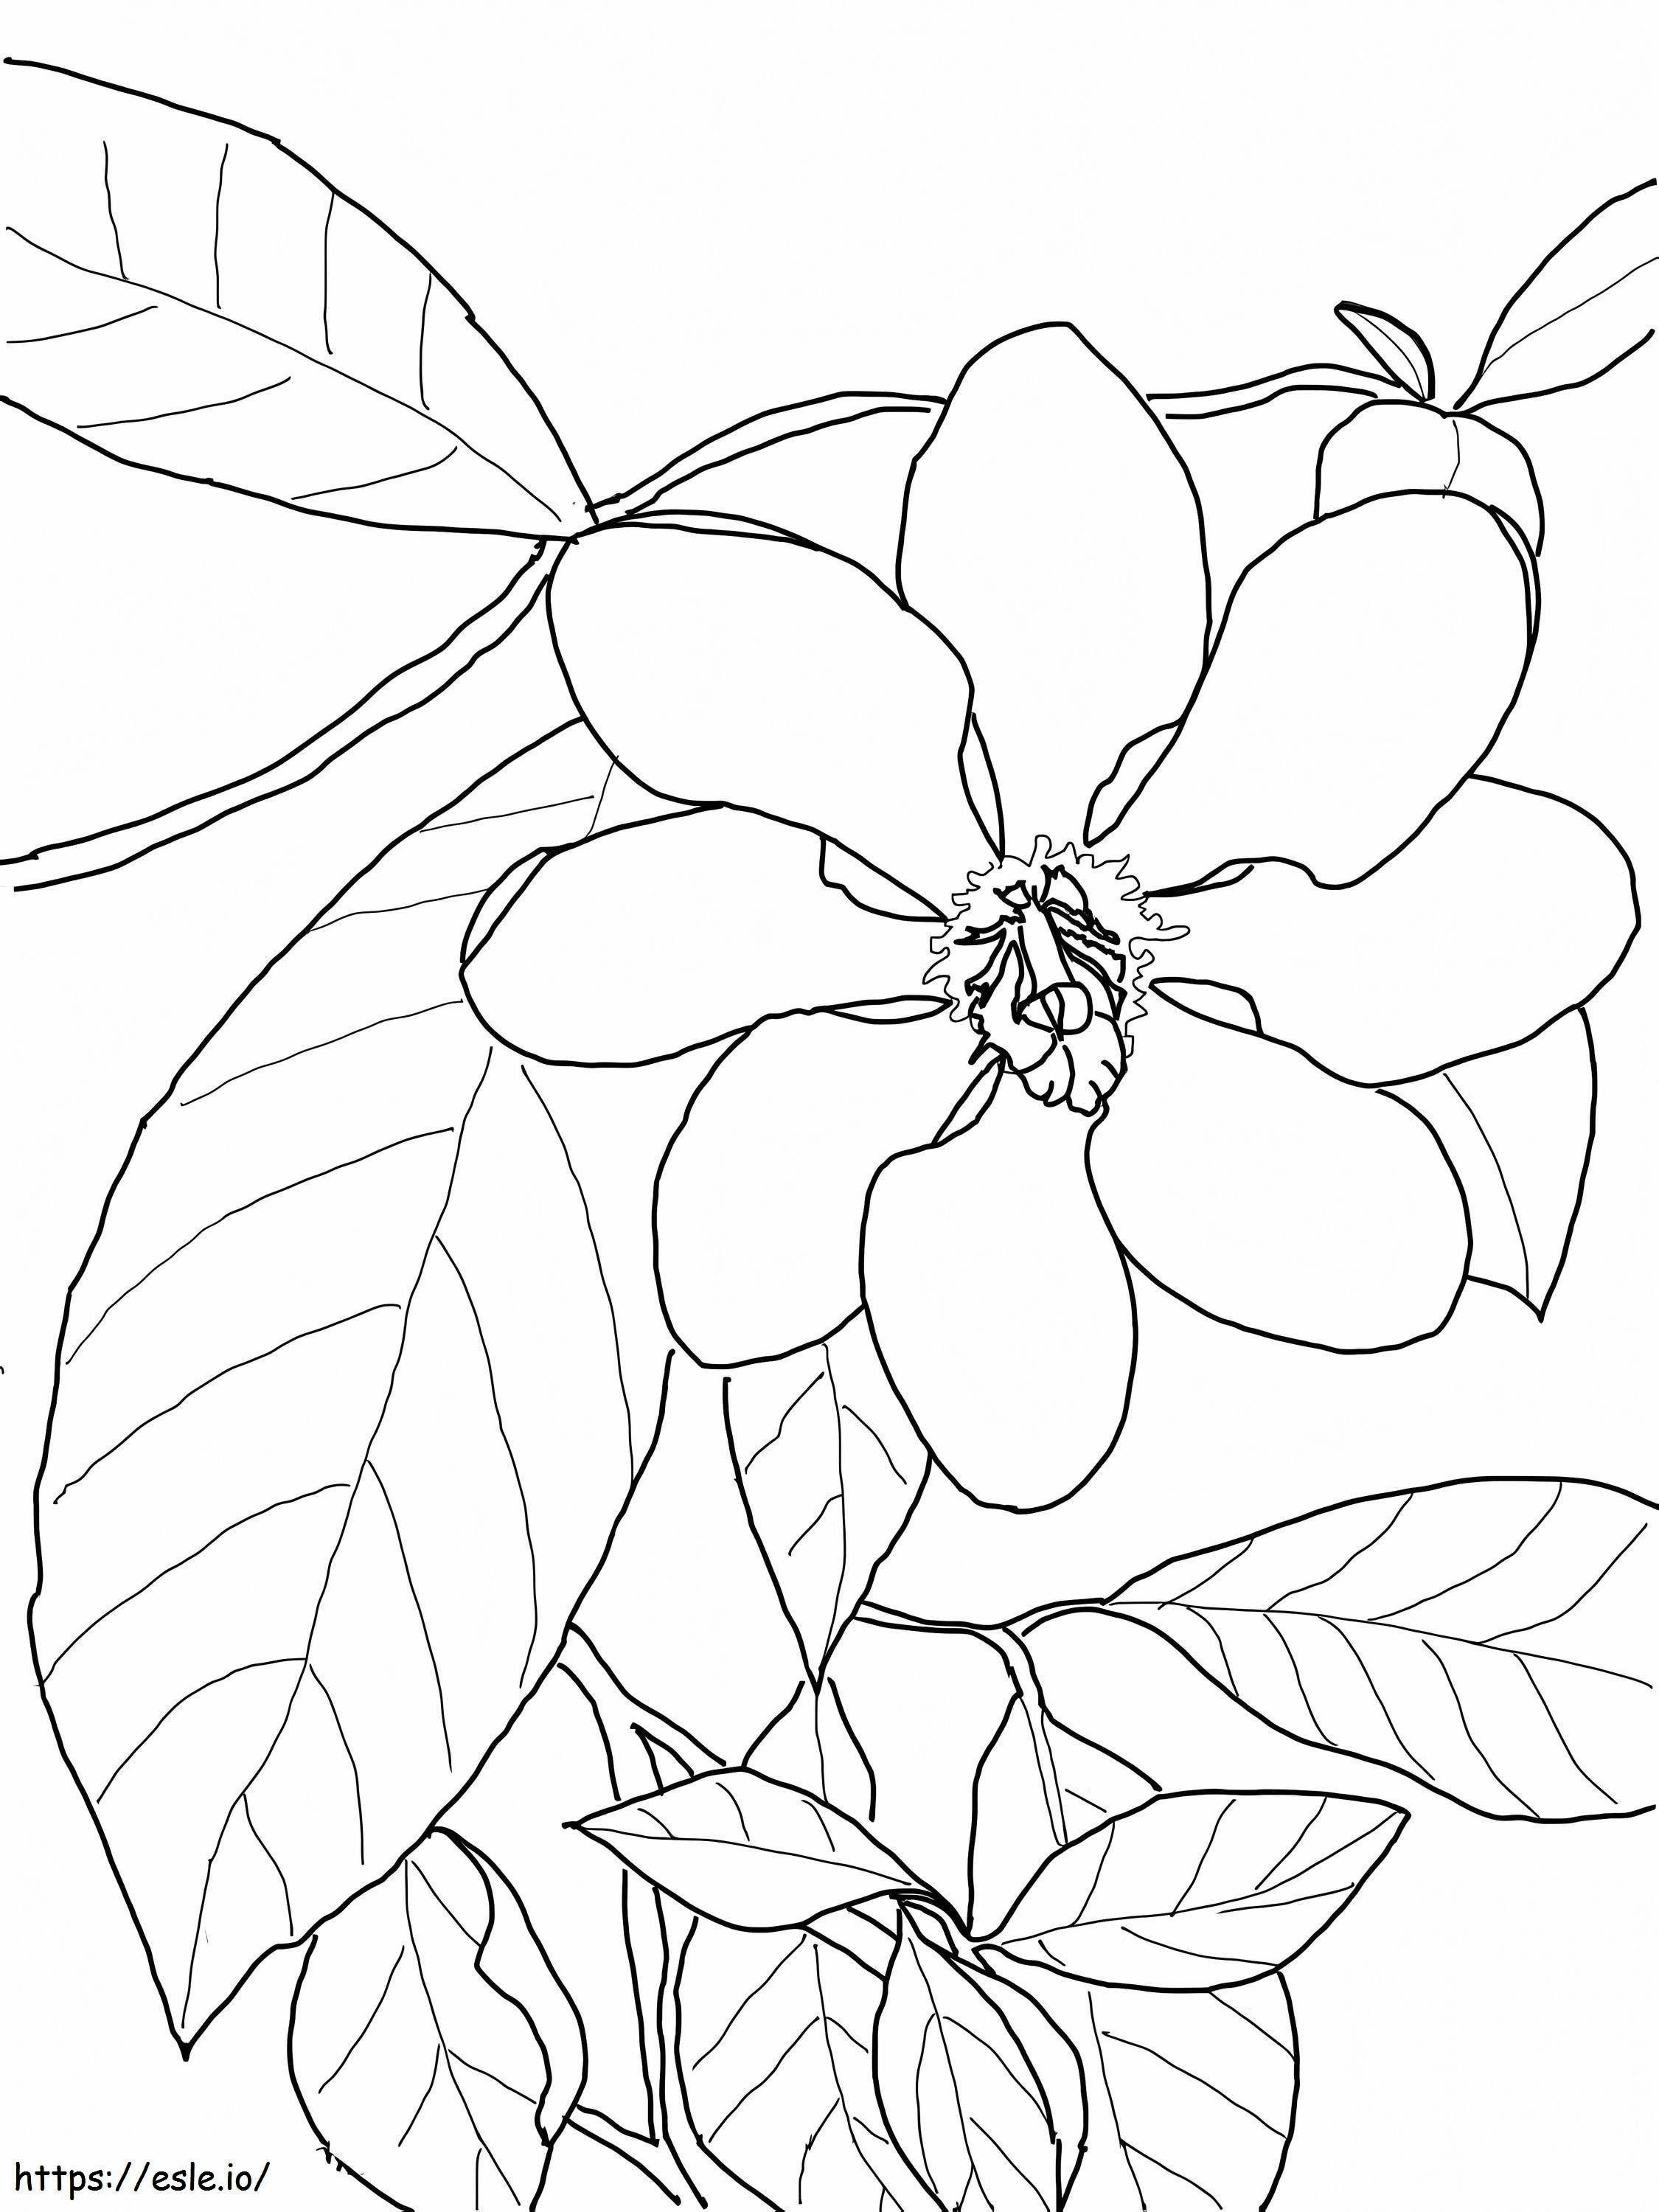 Basic Gardenia With Leaf coloring page